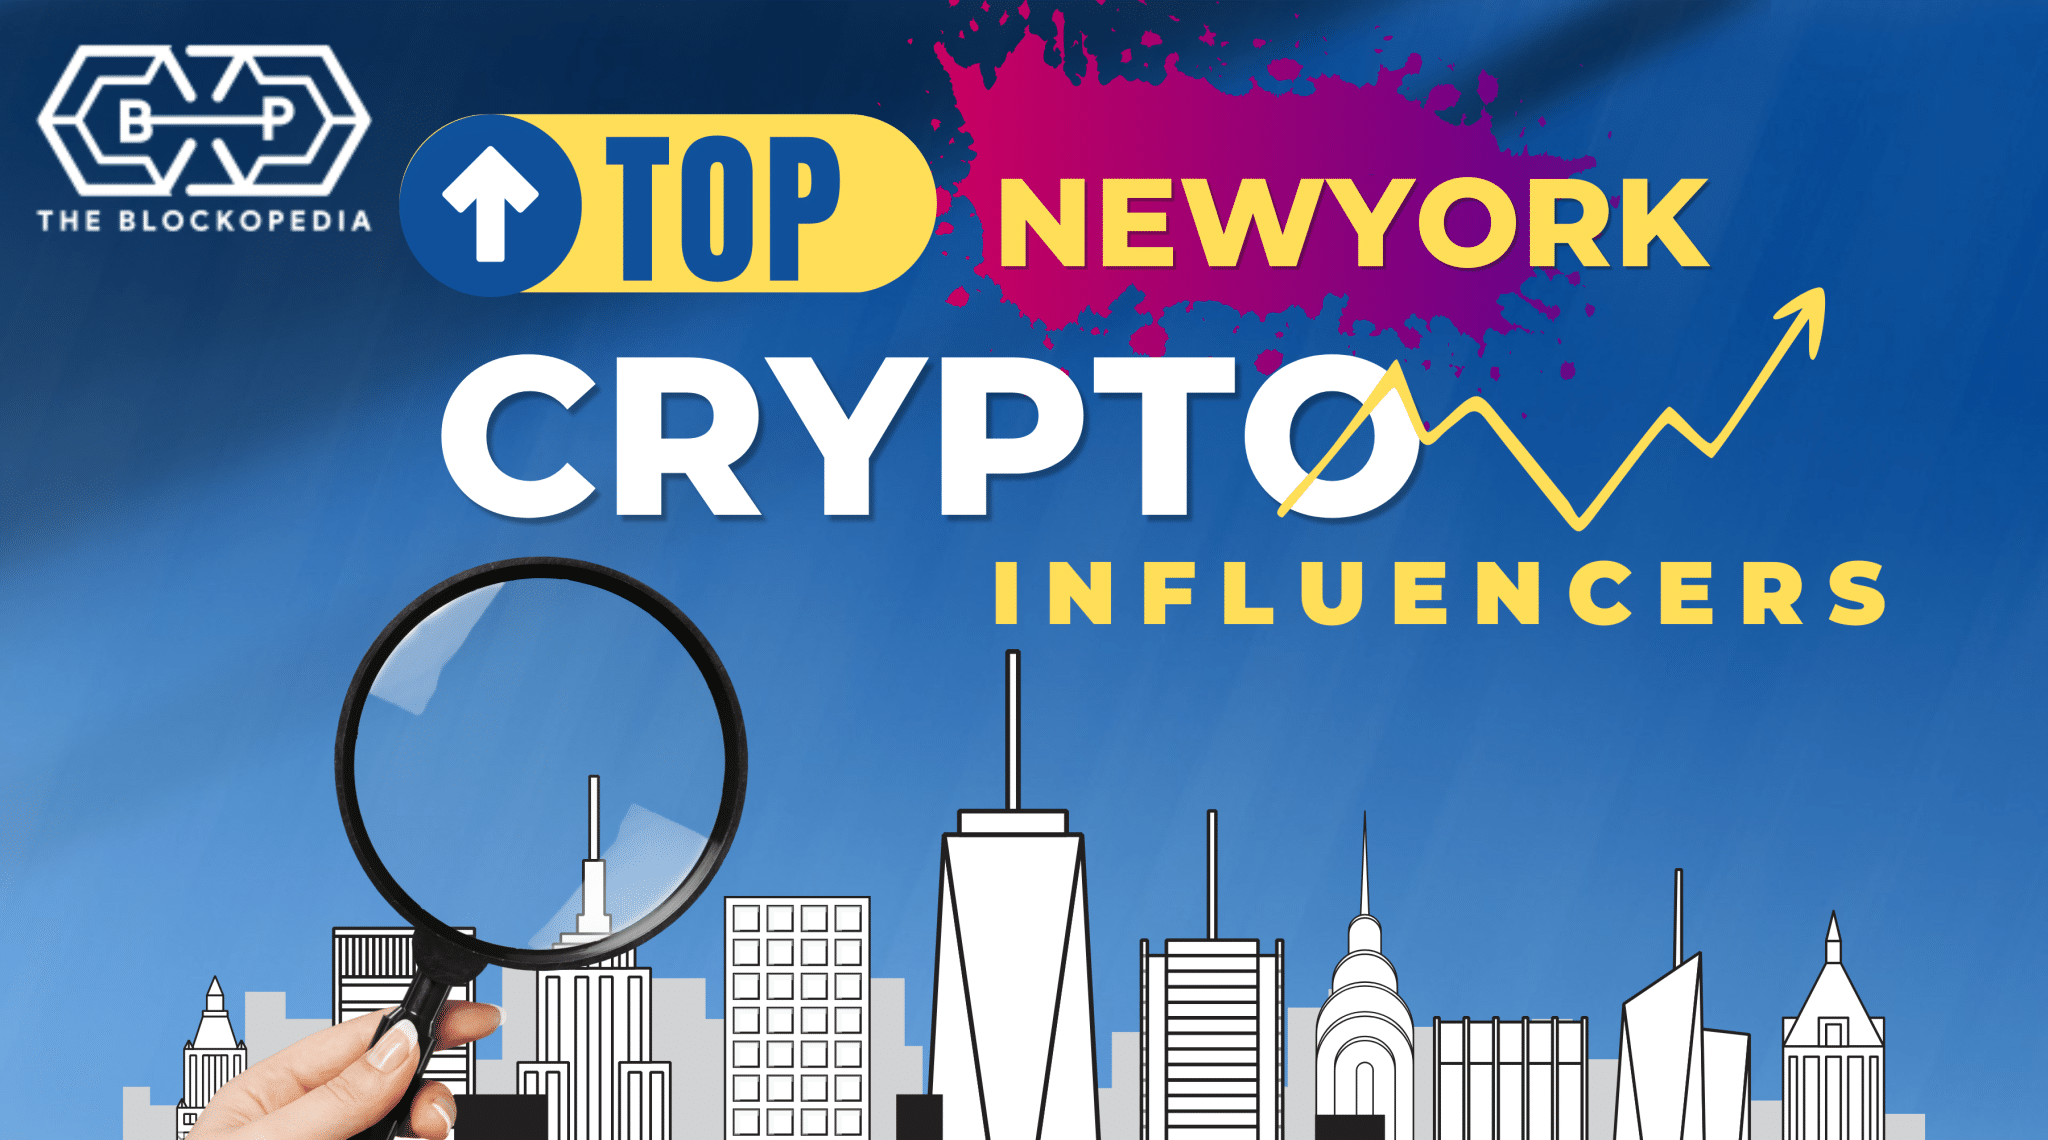 Top Crypto Influencers In New York